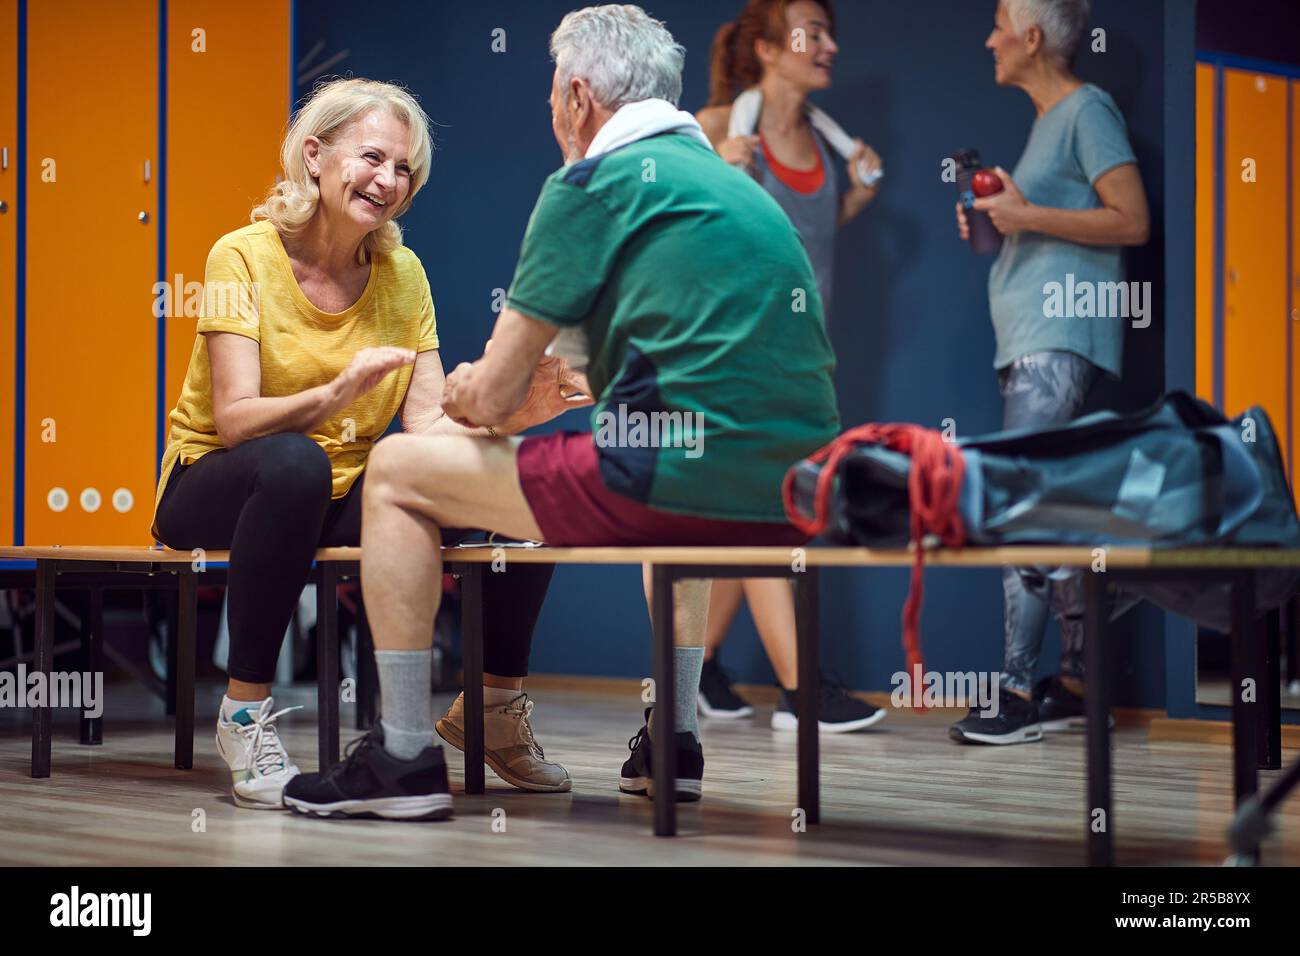 Mature man and woman facing each other while sitting in gym locker room and talking before training. Health concept. Stock Photo